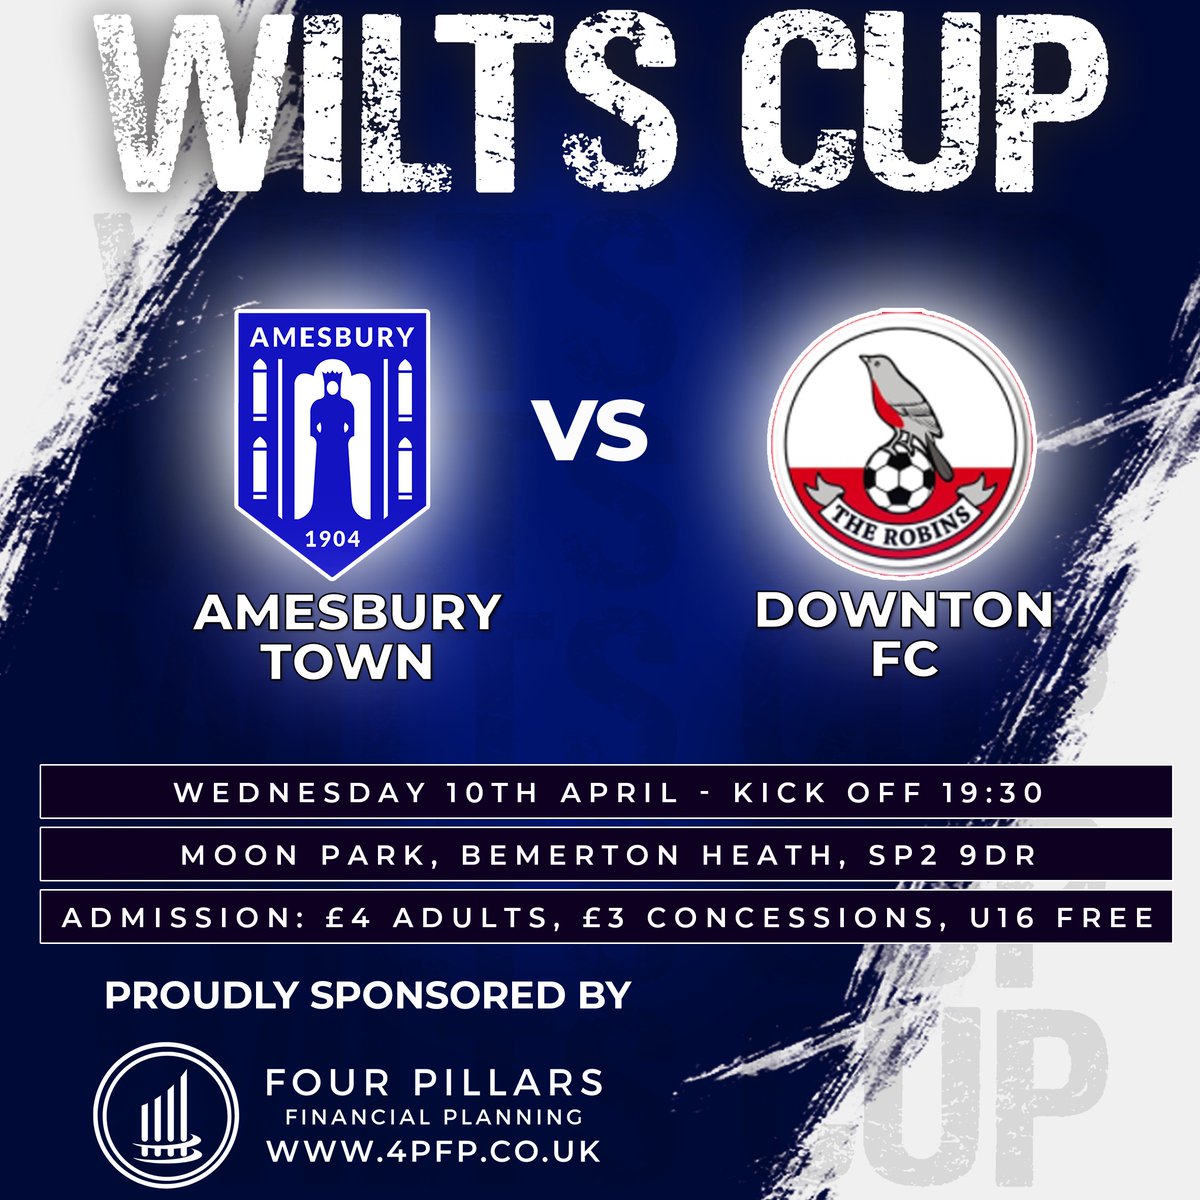 𝗡𝗘𝗫𝗧 𝗨𝗣

Its the Wiltshire Senior Cup Final on Wednesday evening

Come & support the lads as we face a tough test against Downton of the @WessexLeague

🆚@DowntonFC
🏆@WiltshireFA
📌Moon Park SP2 9DR
🧭bit.ly/Bemmy
⏰19:30
💵Adults £5 / OAP £3 / 16 & Under Free